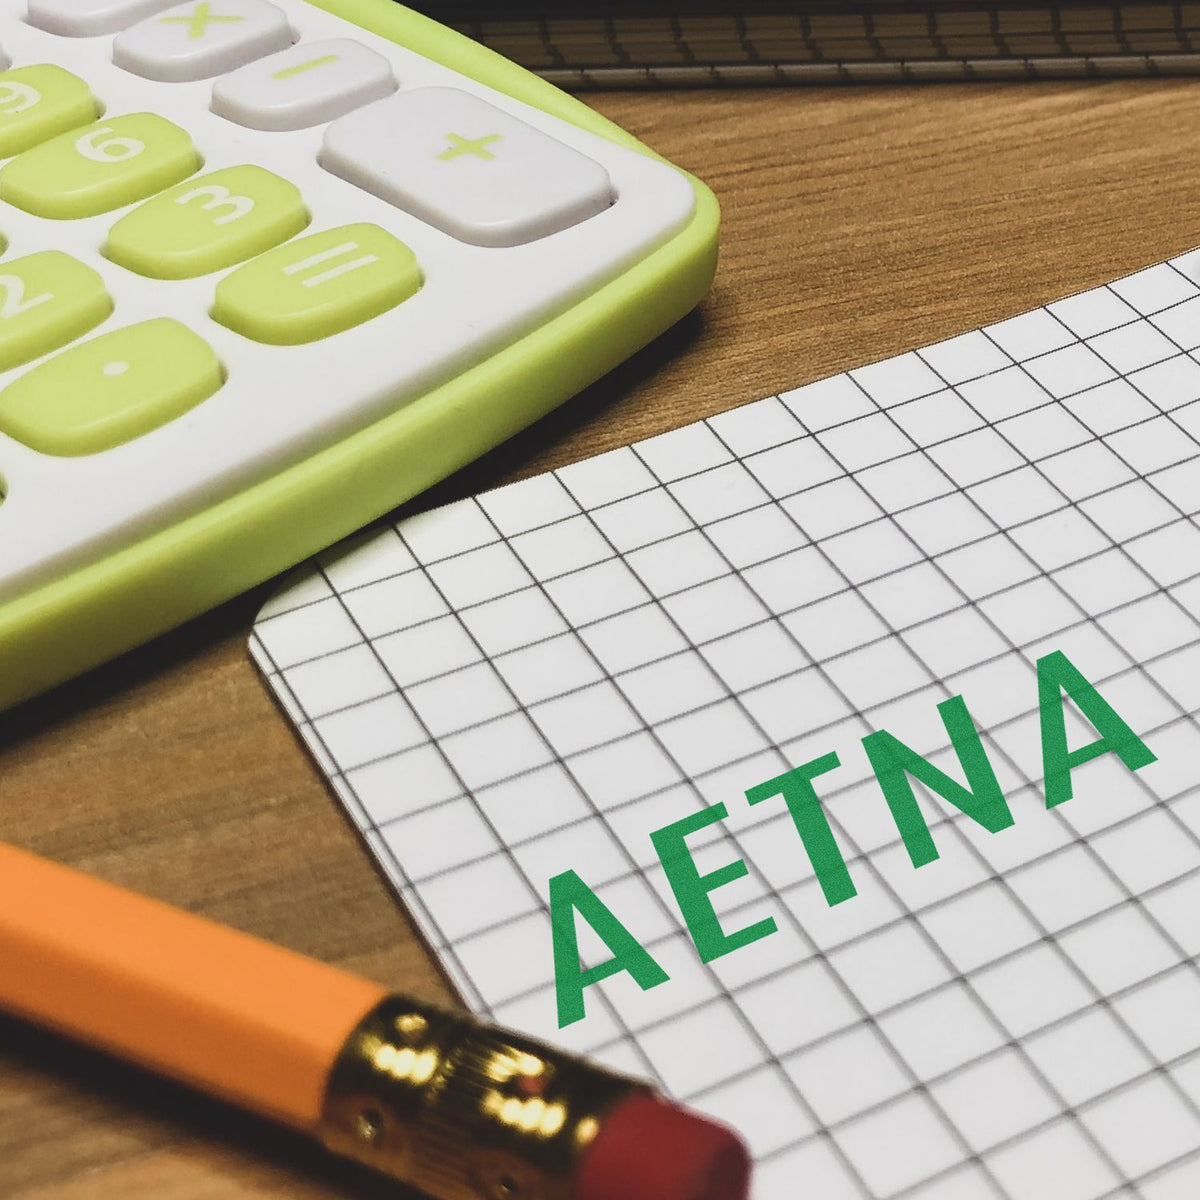 Large Pre-Inked Aetna Stamp In Use